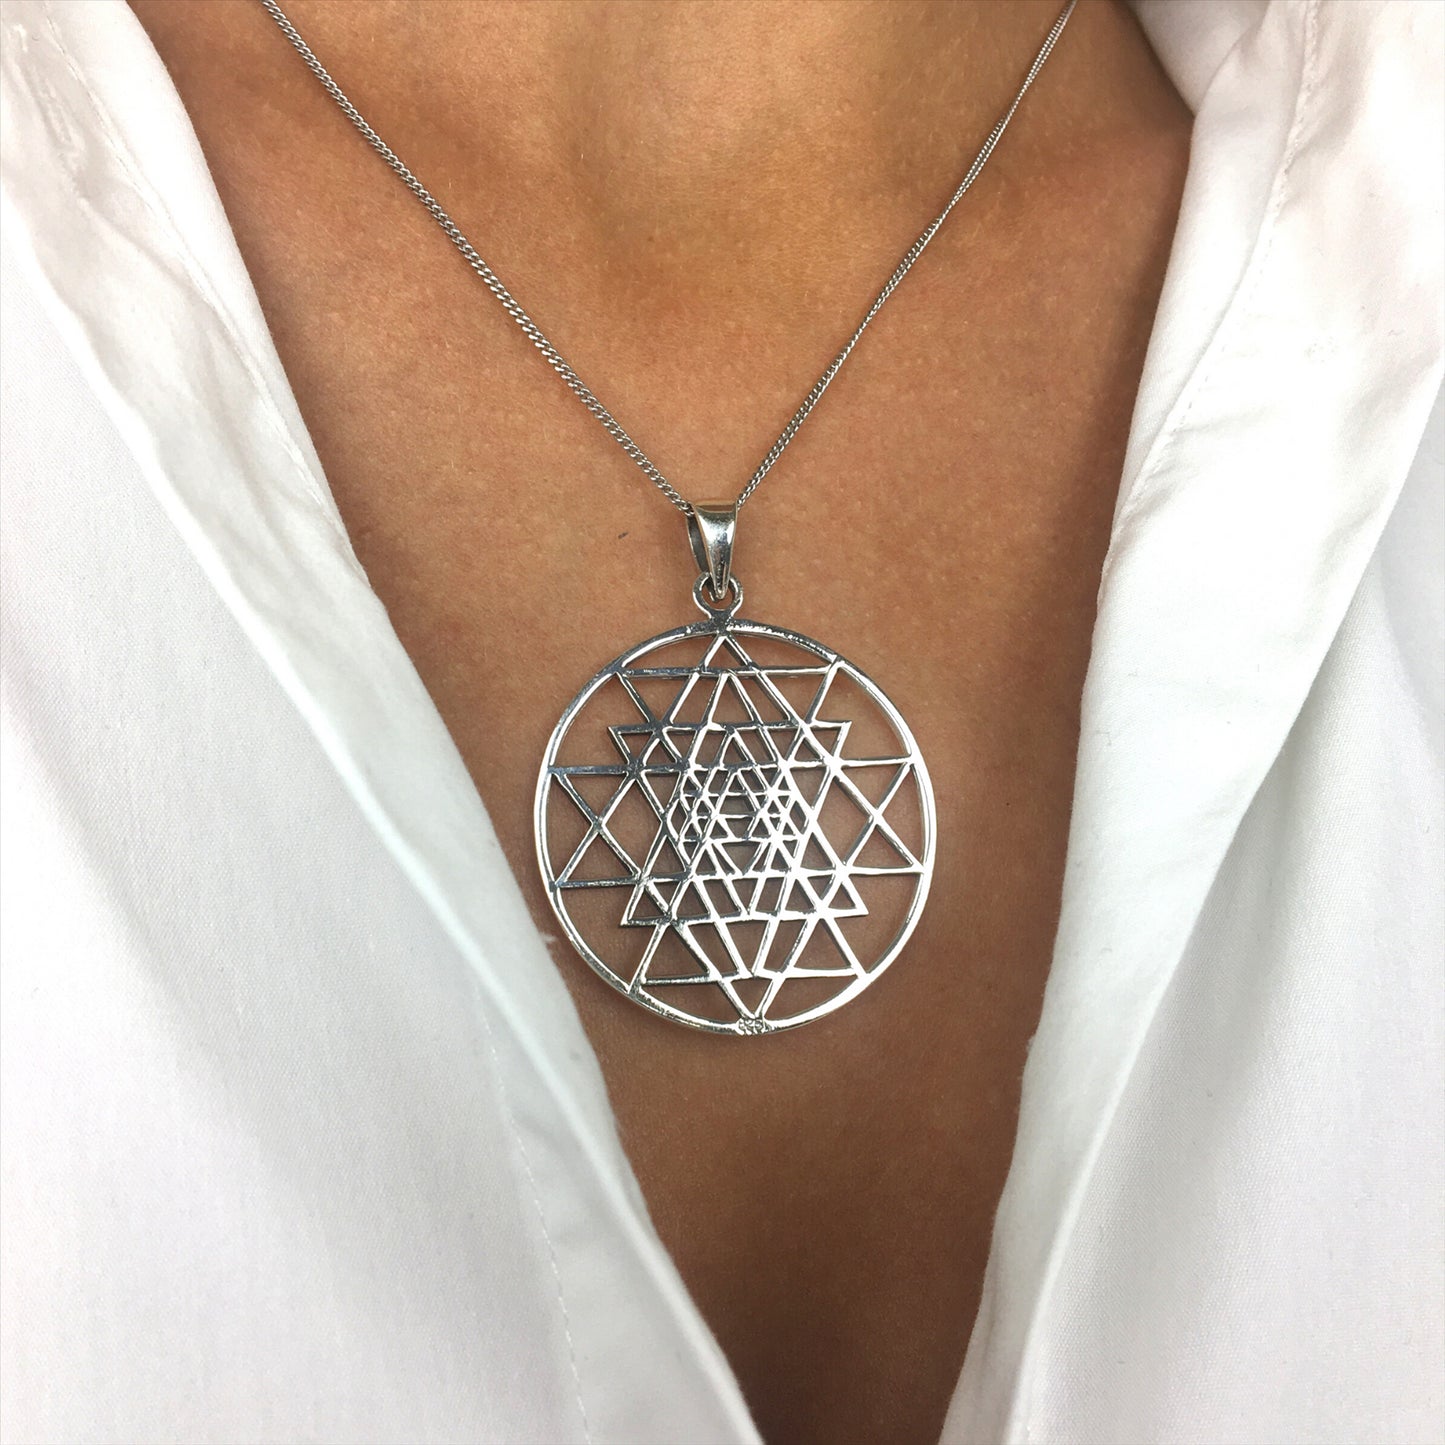 Large Round Cut-Out Sri Yantra Pendant Necklace, Sterling Silver